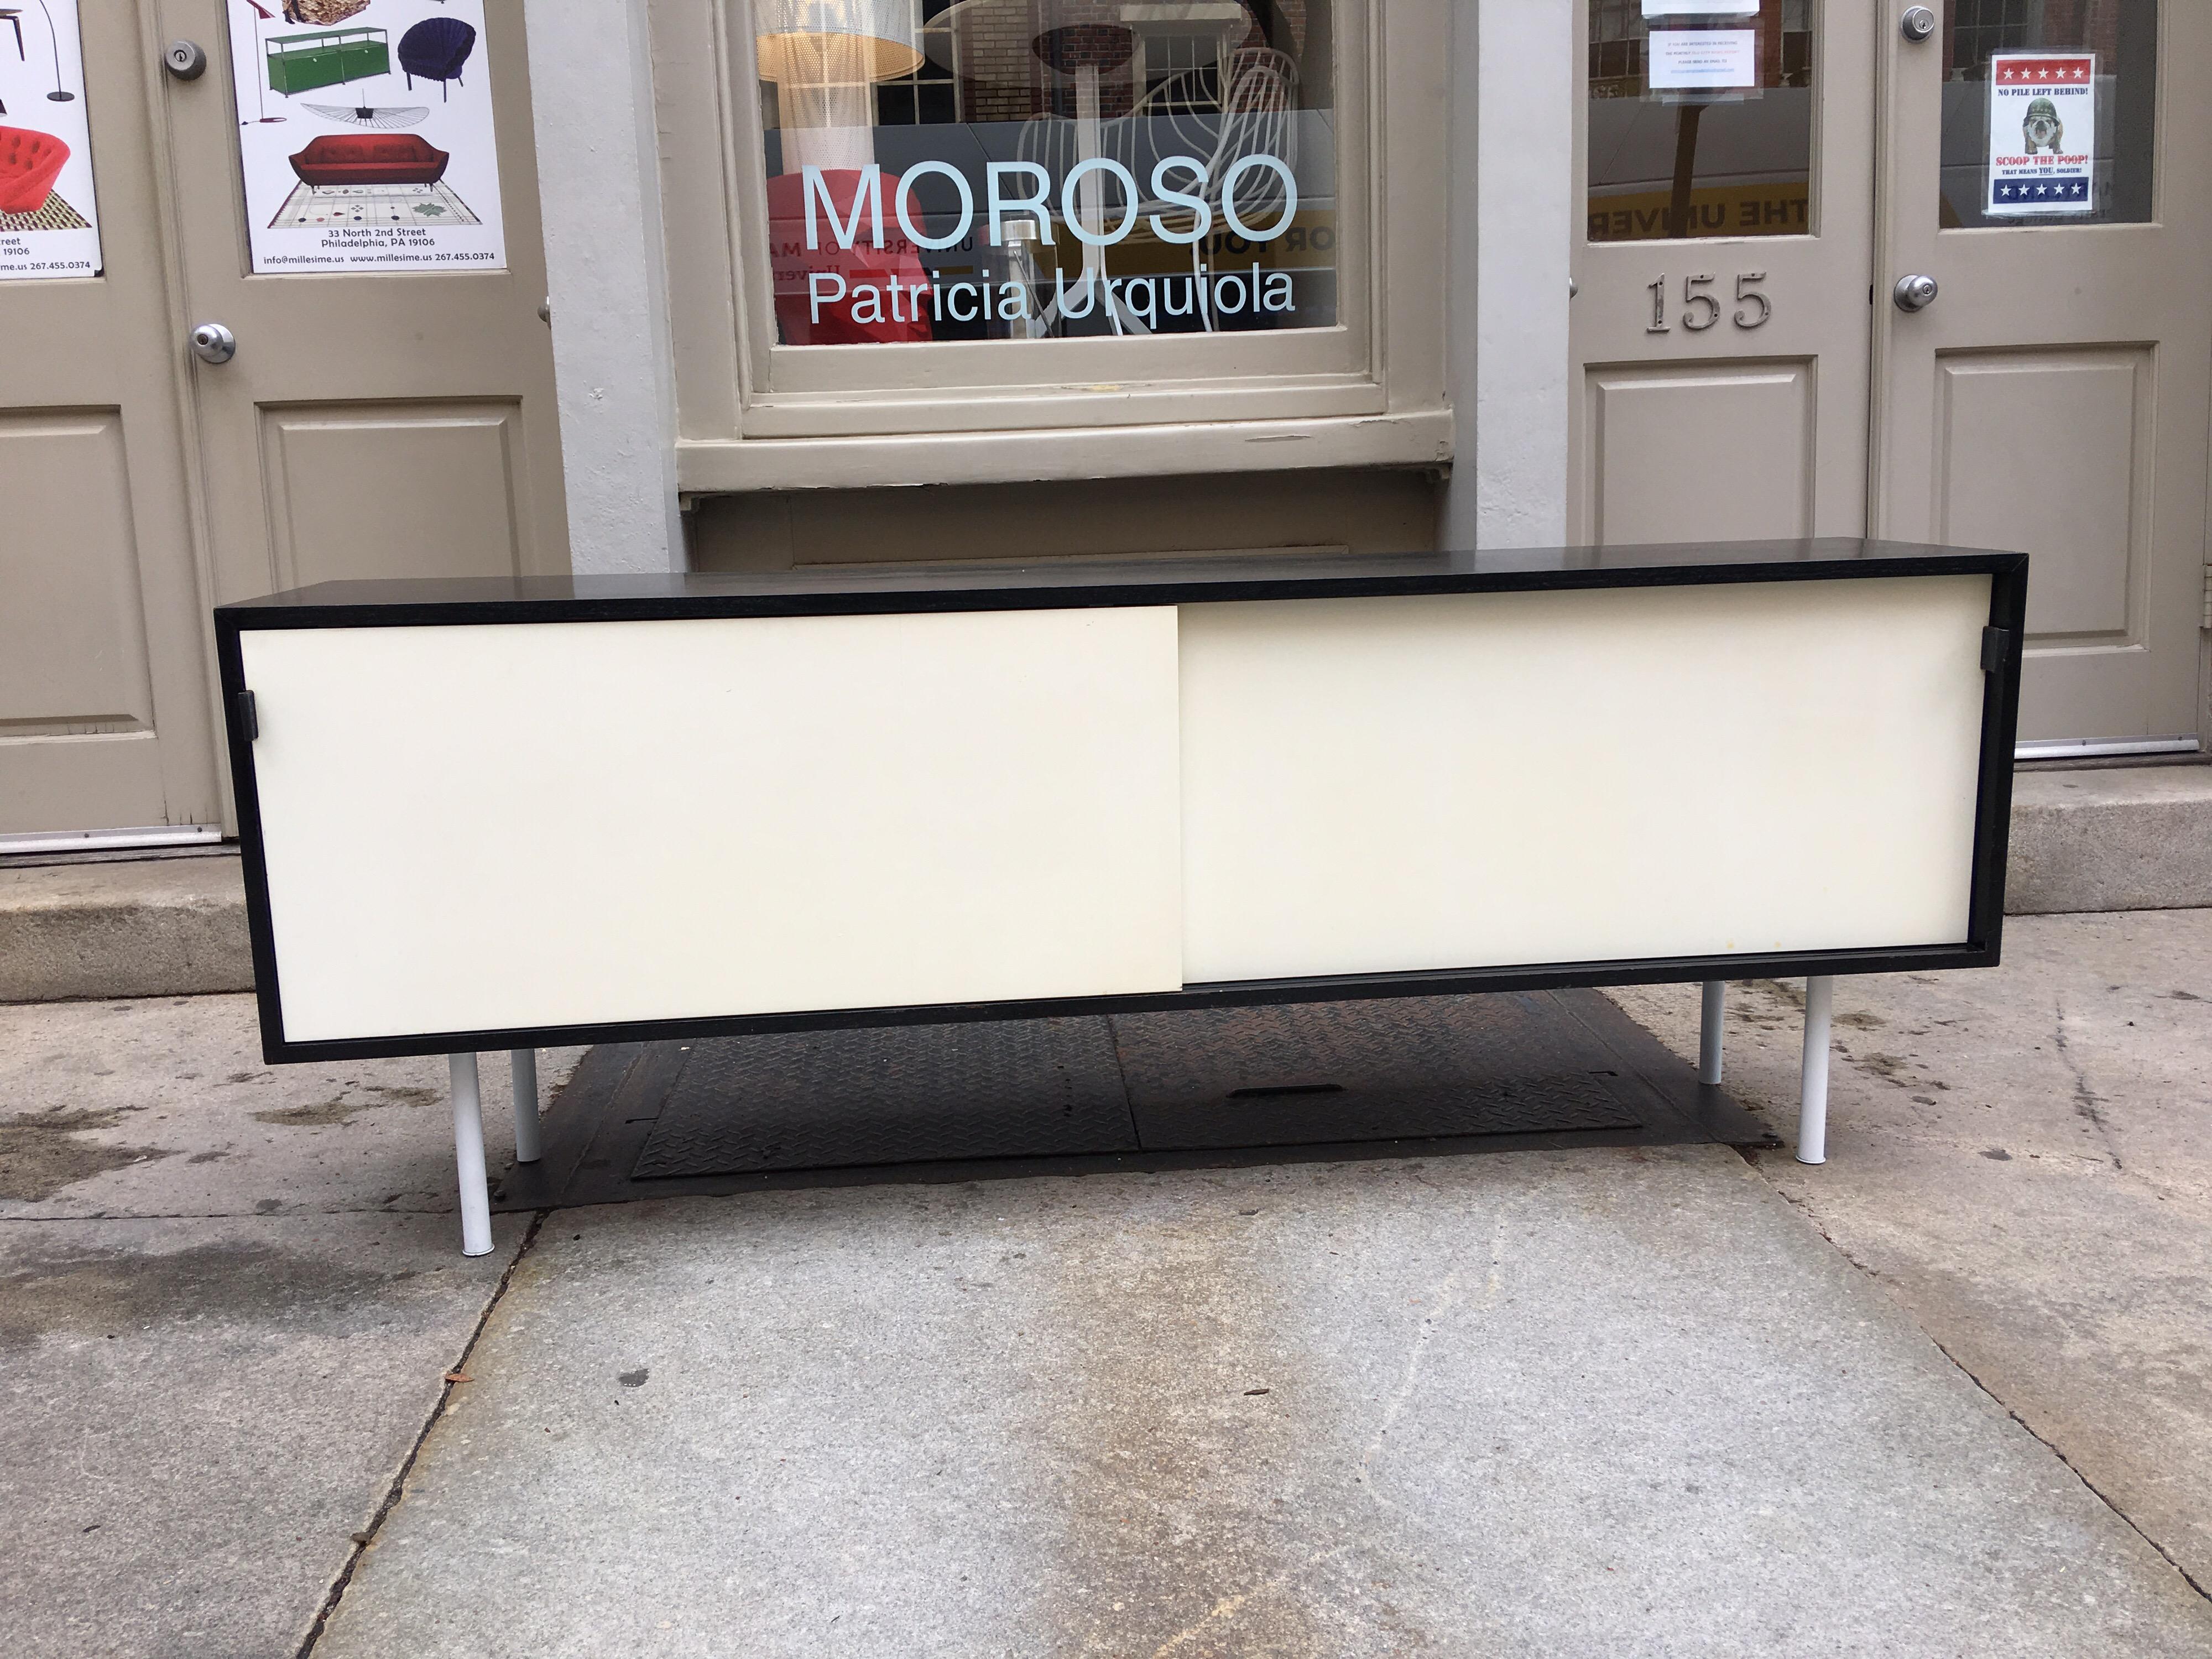 Florence Knoll original black finish credenza. Use either on the wall or with legs, original cleat is still installed for ease of mounting on the wall. Inside white finish shows some discoloration. Original label to underside.